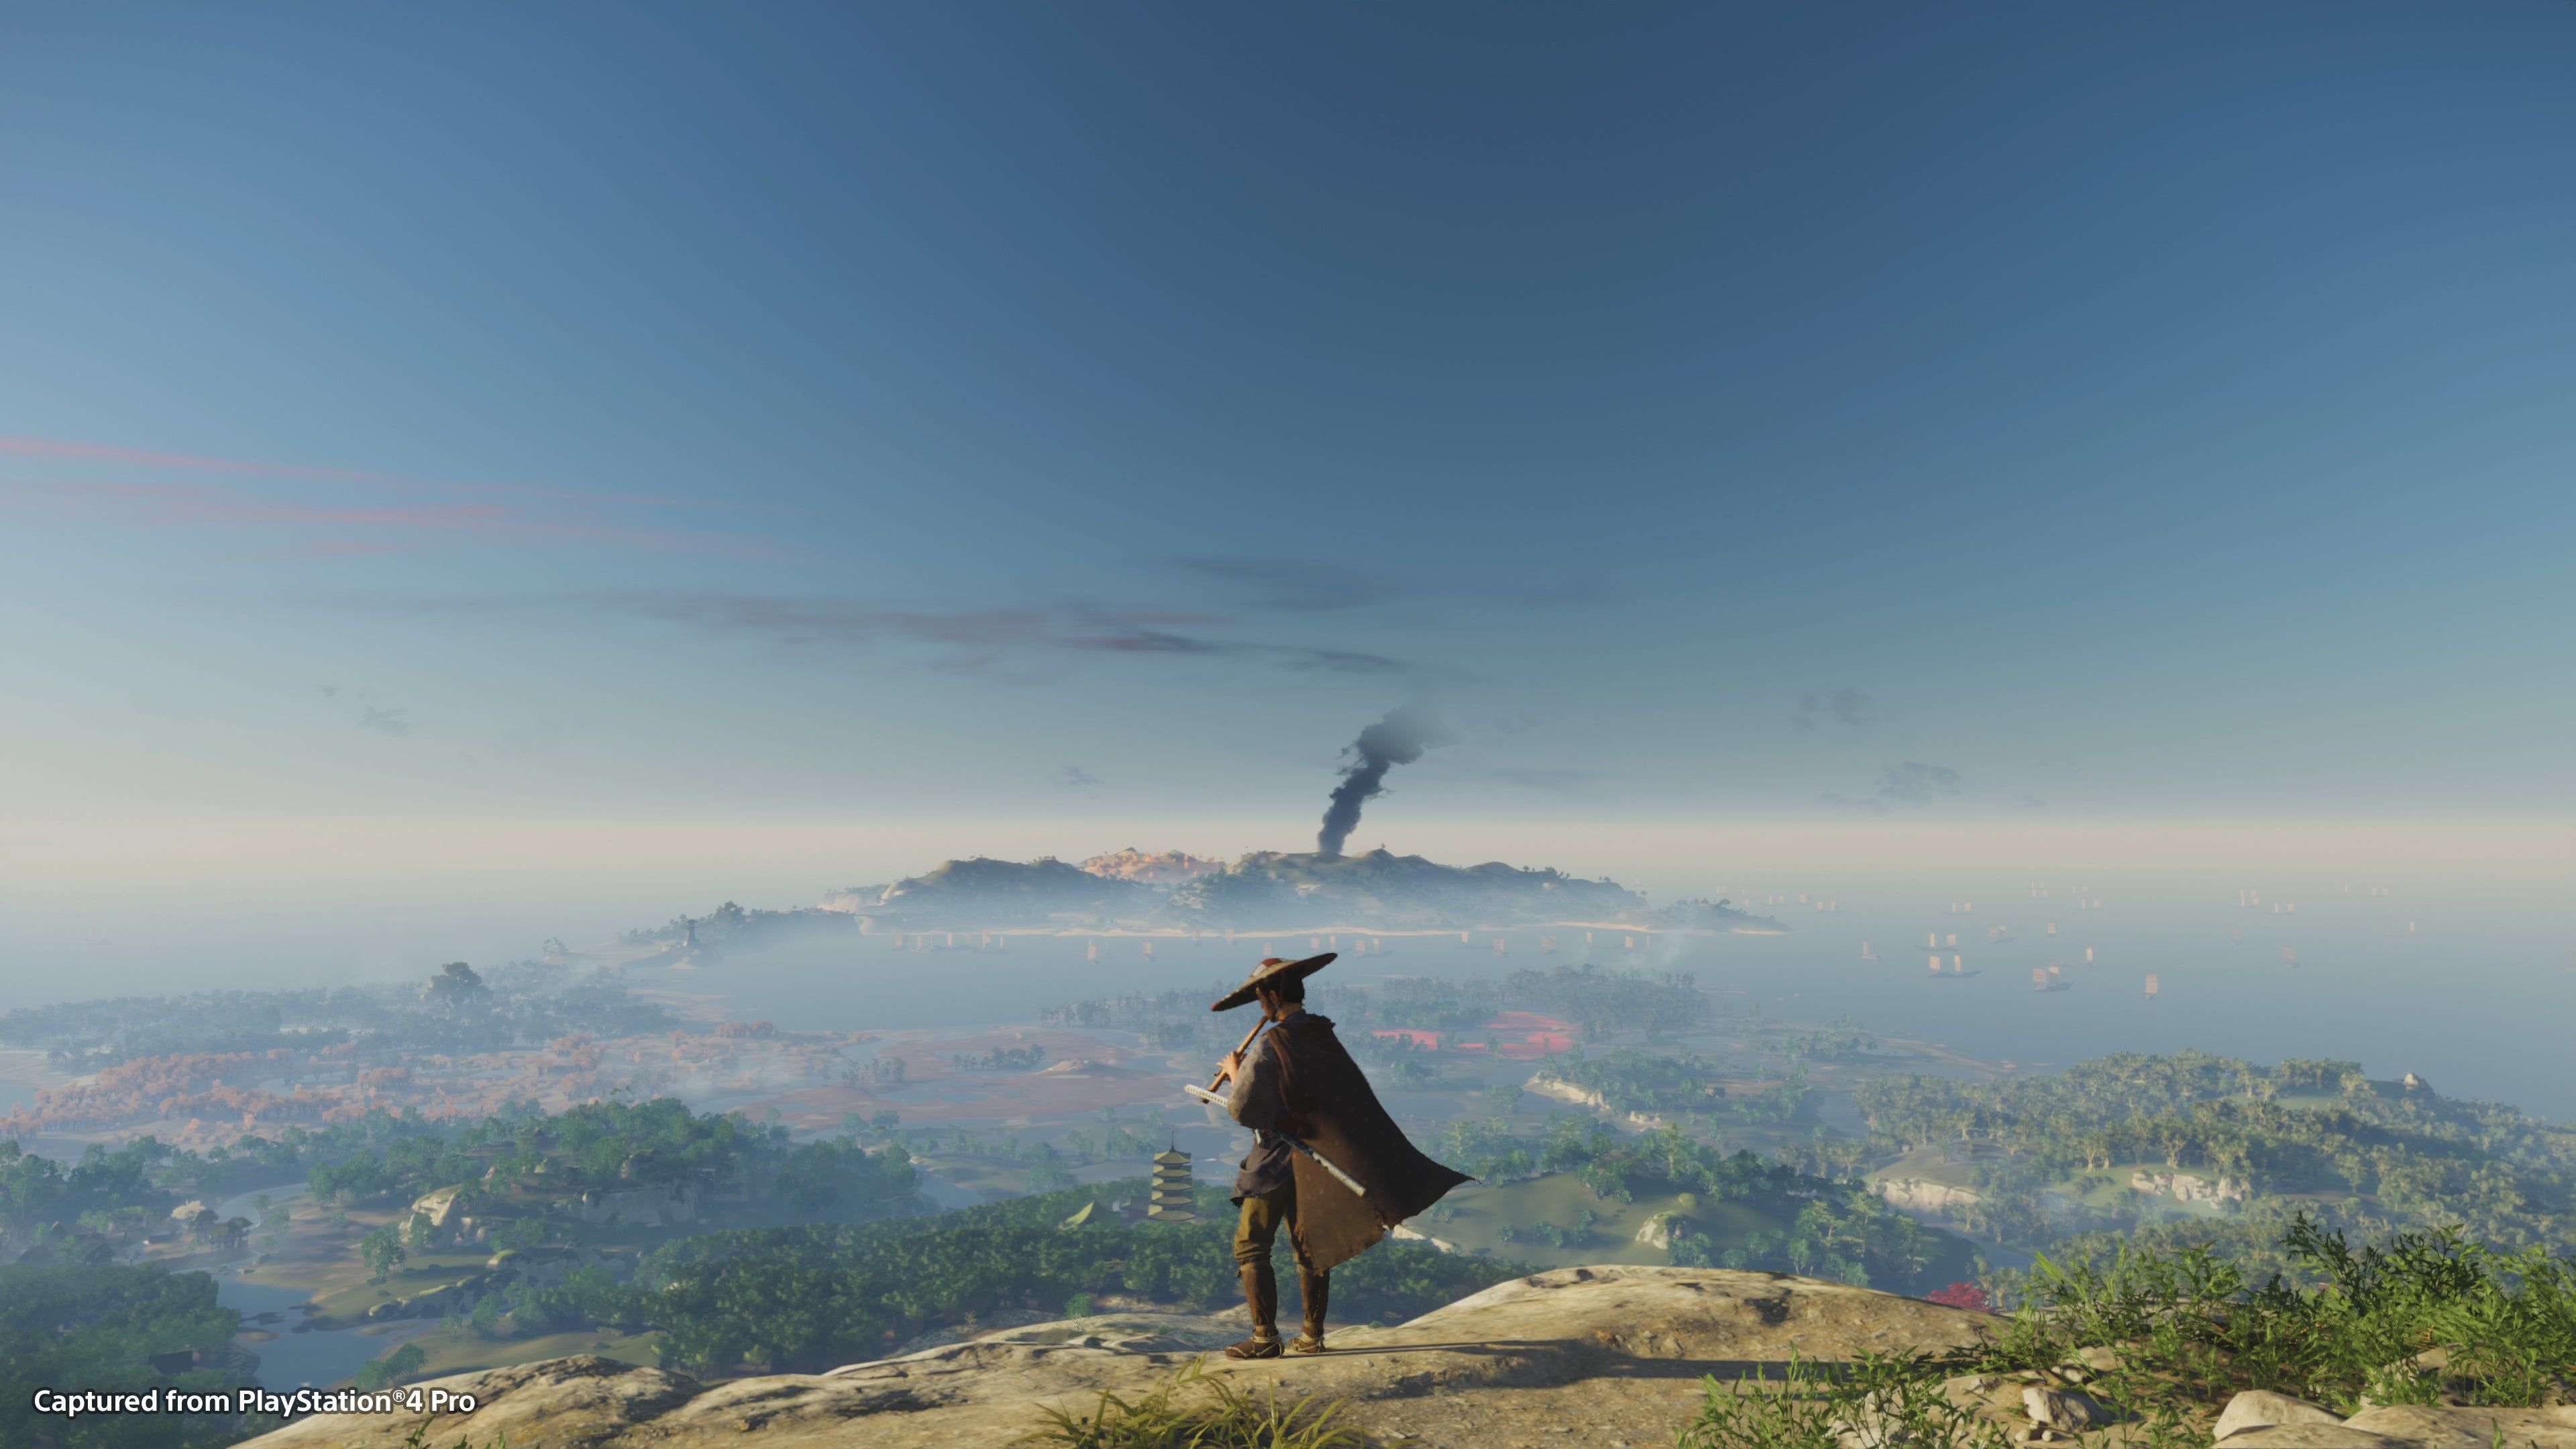  Ghost Of Tsushima Hintergrundbild 3840x2160. Ghost of Tsushima and Staying True to Japanese Cultural Aesthetics